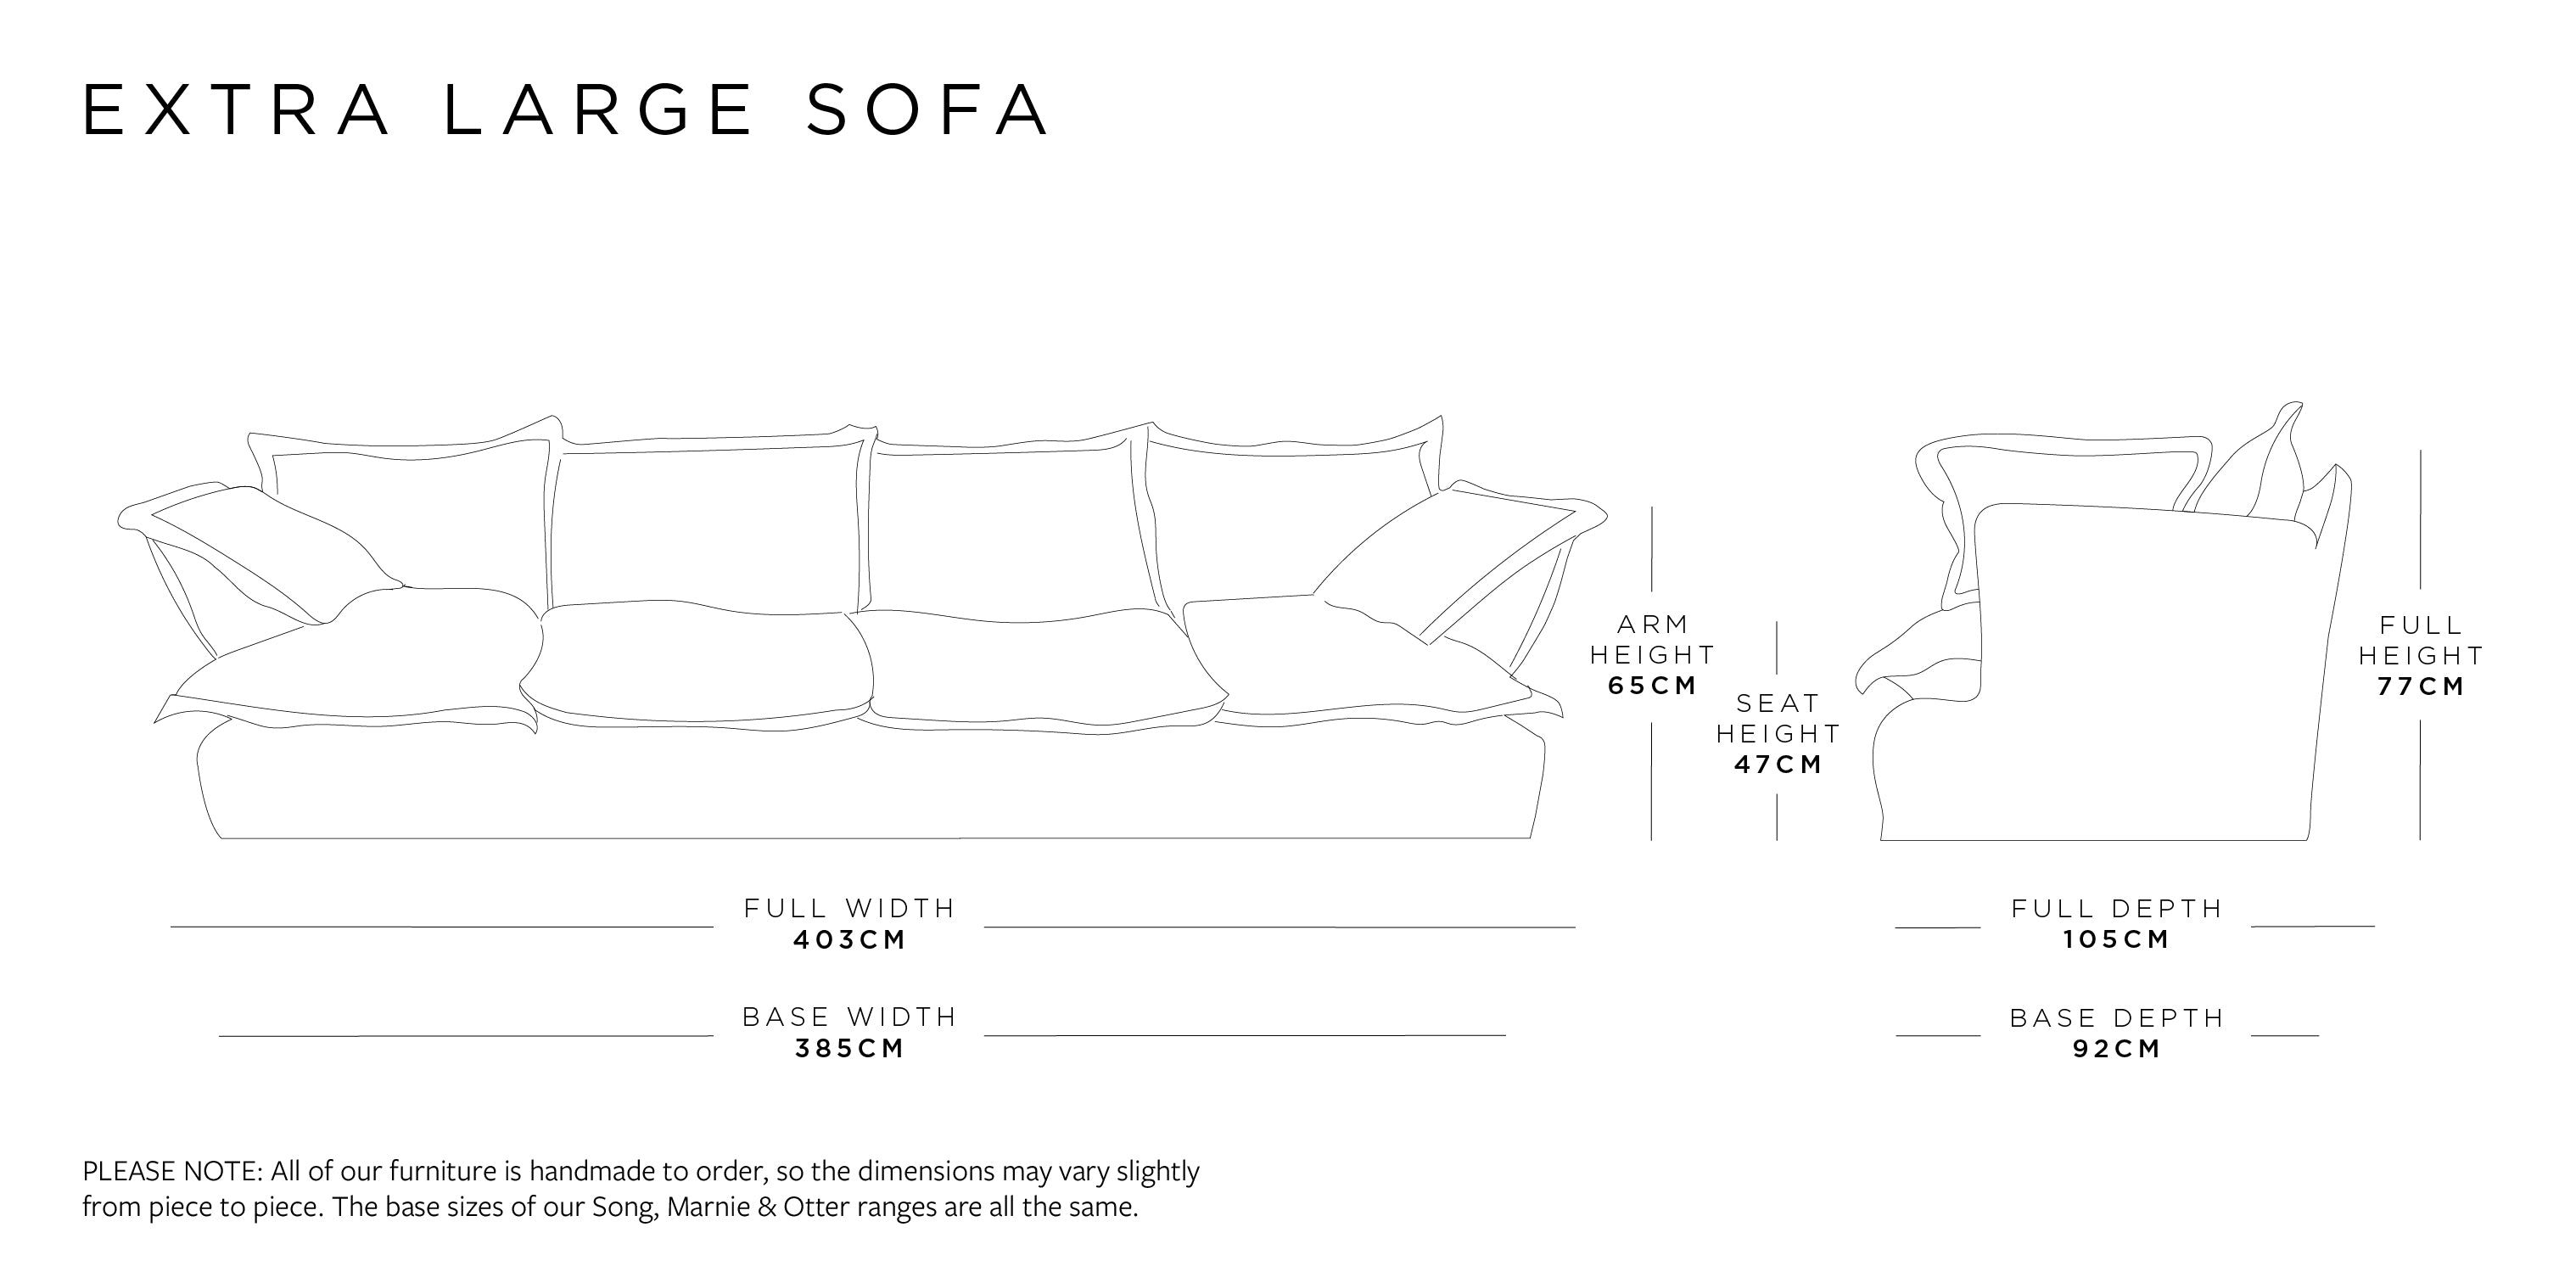 Extra Large Sofa | Song Range Size Guide